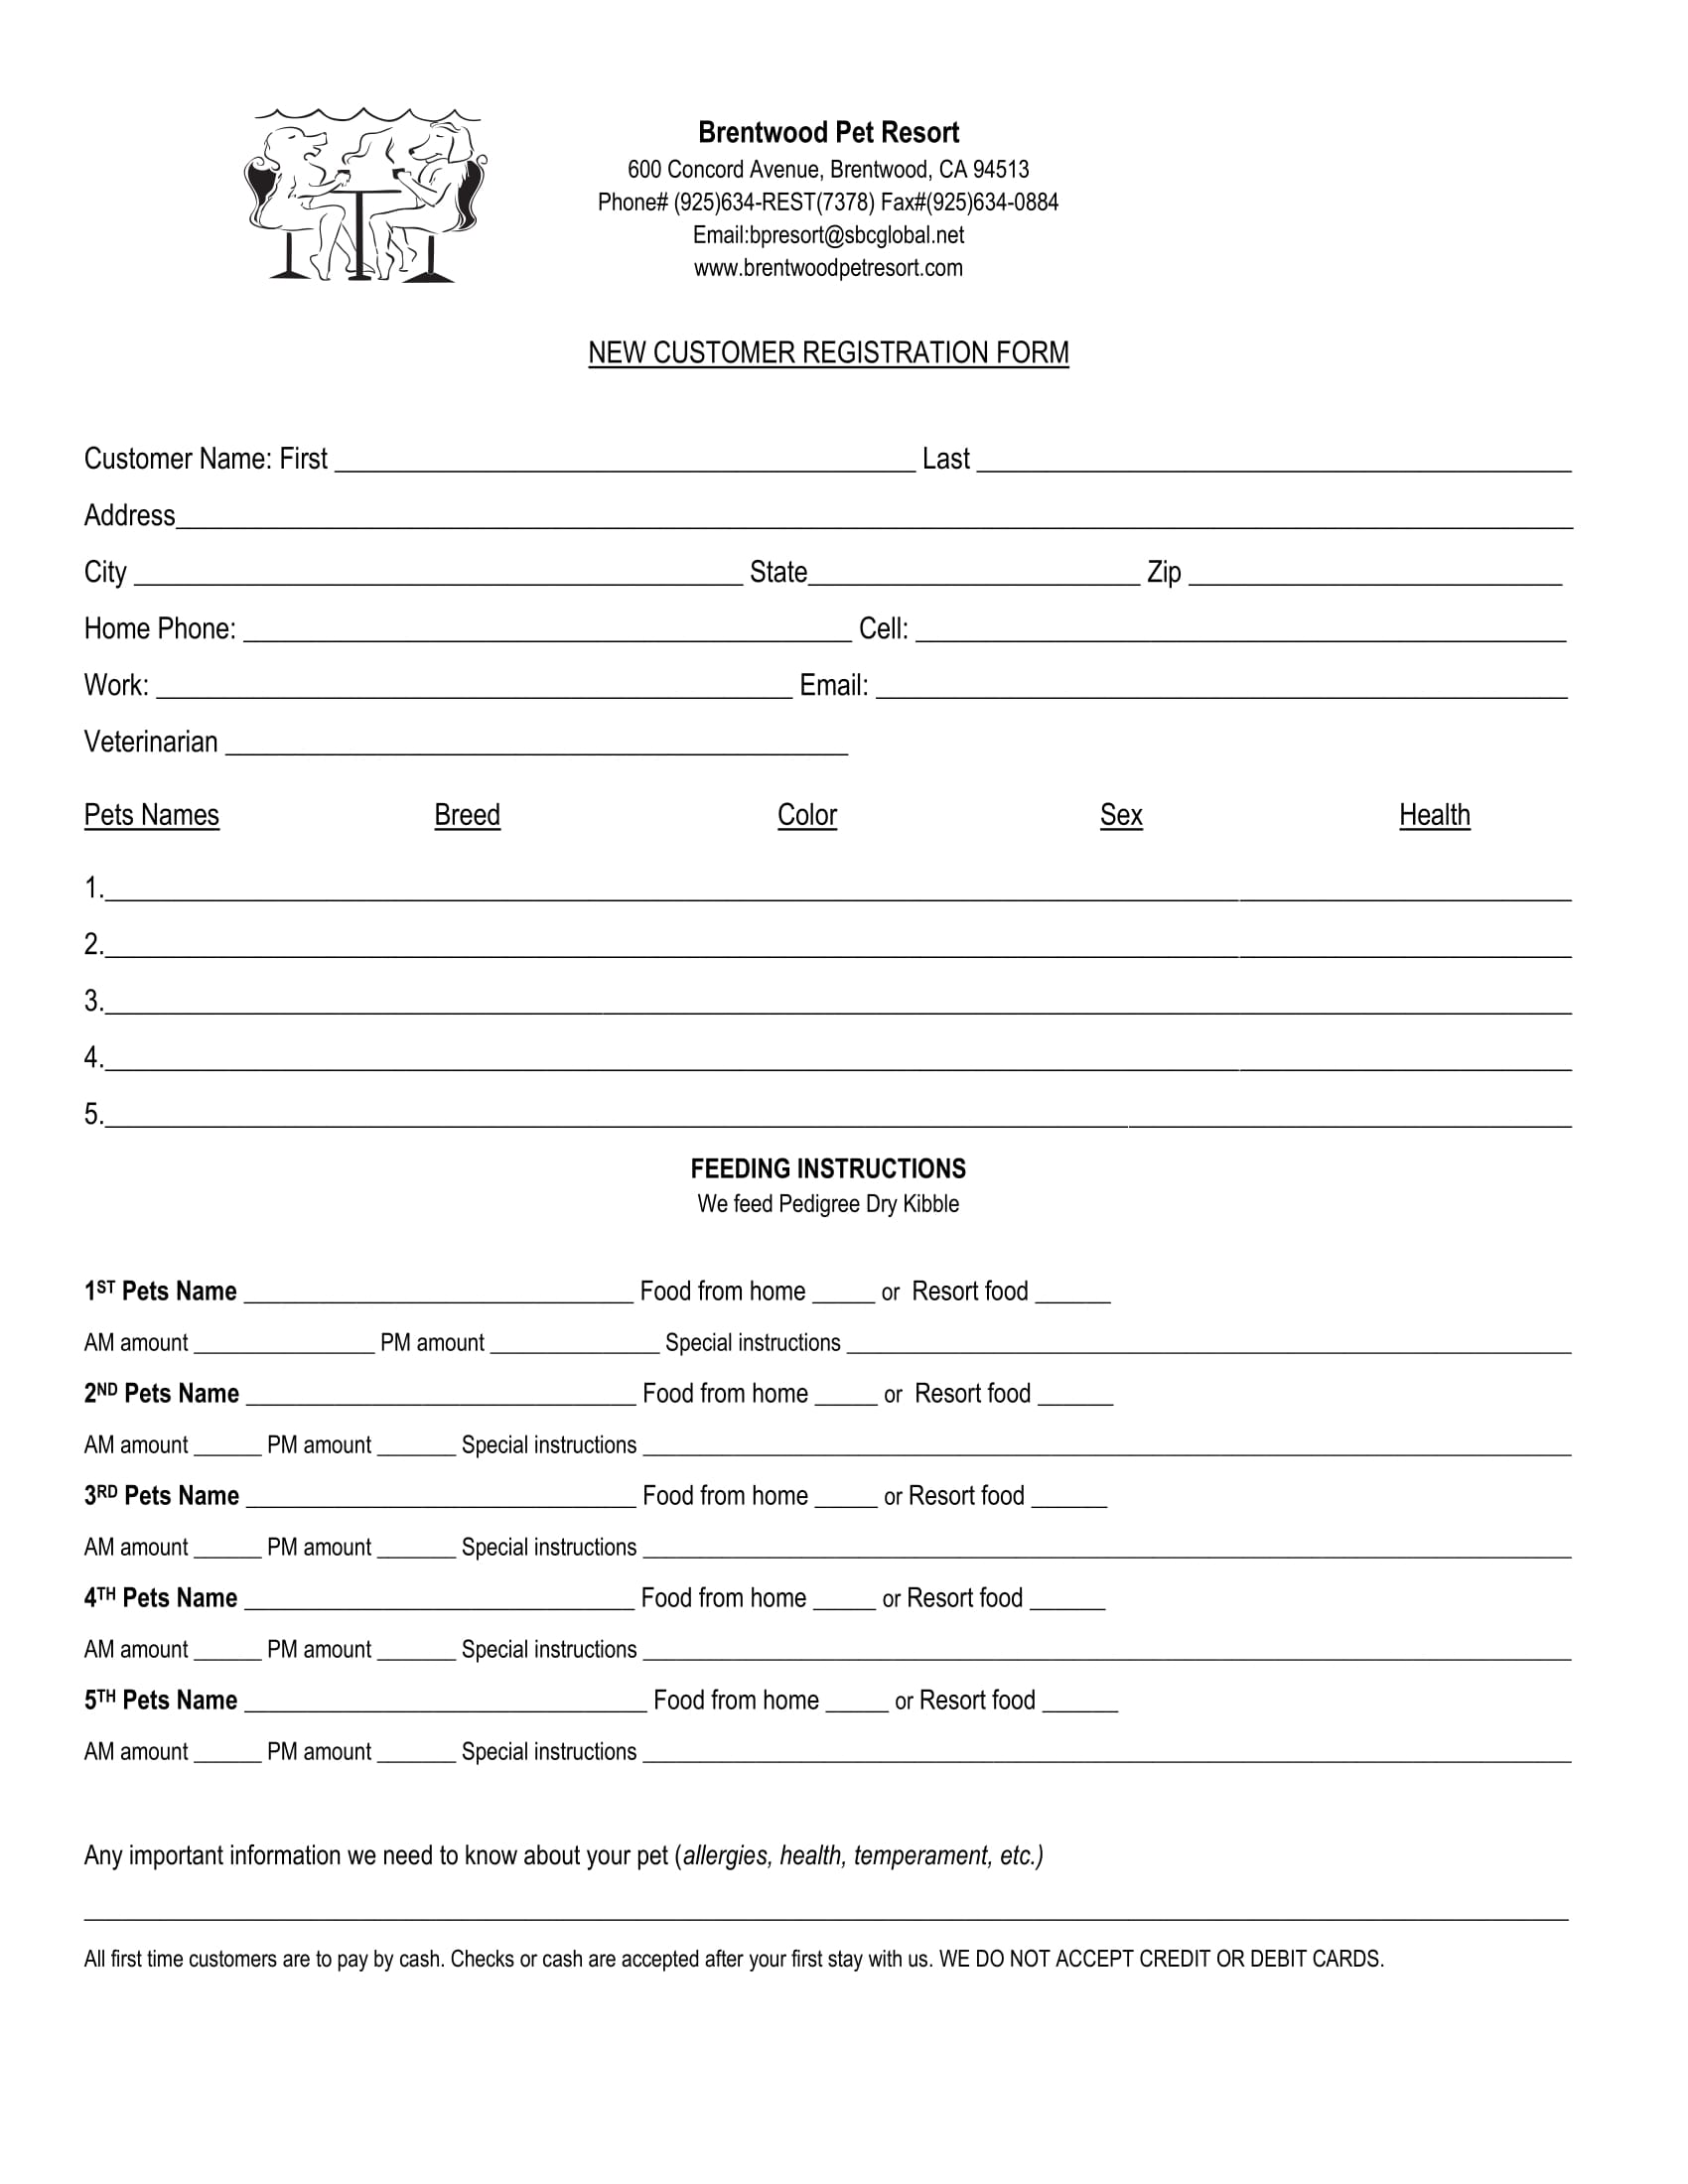 free-6-new-customer-registration-forms-in-pdf-ms-word